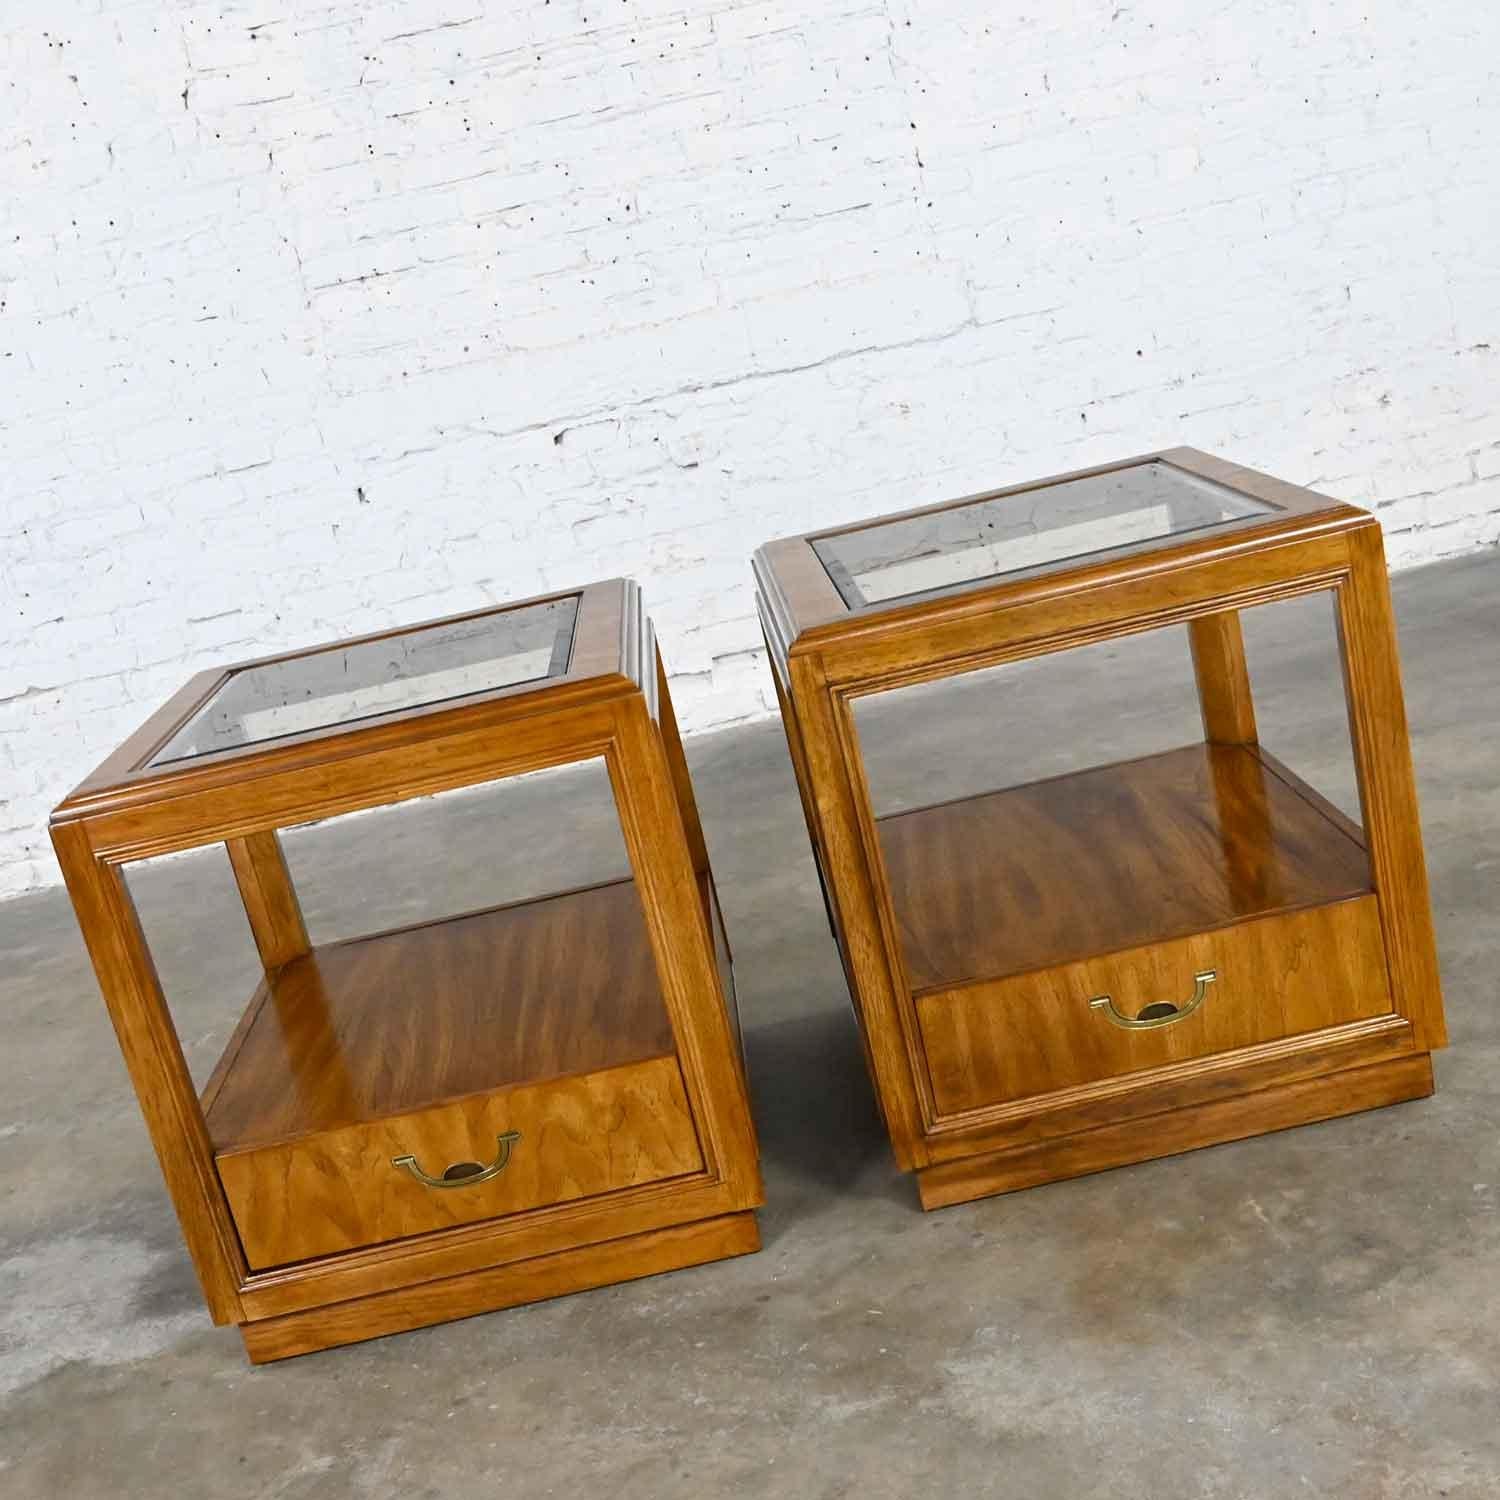 Gorgeous vintage Drexel Accolade II Collection Campaign style rectangular wood end tables with a single drawer, brass plated hardware, and beveled glass inserts. Beautiful condition, keeping in mind that these are vintage and not new so will have